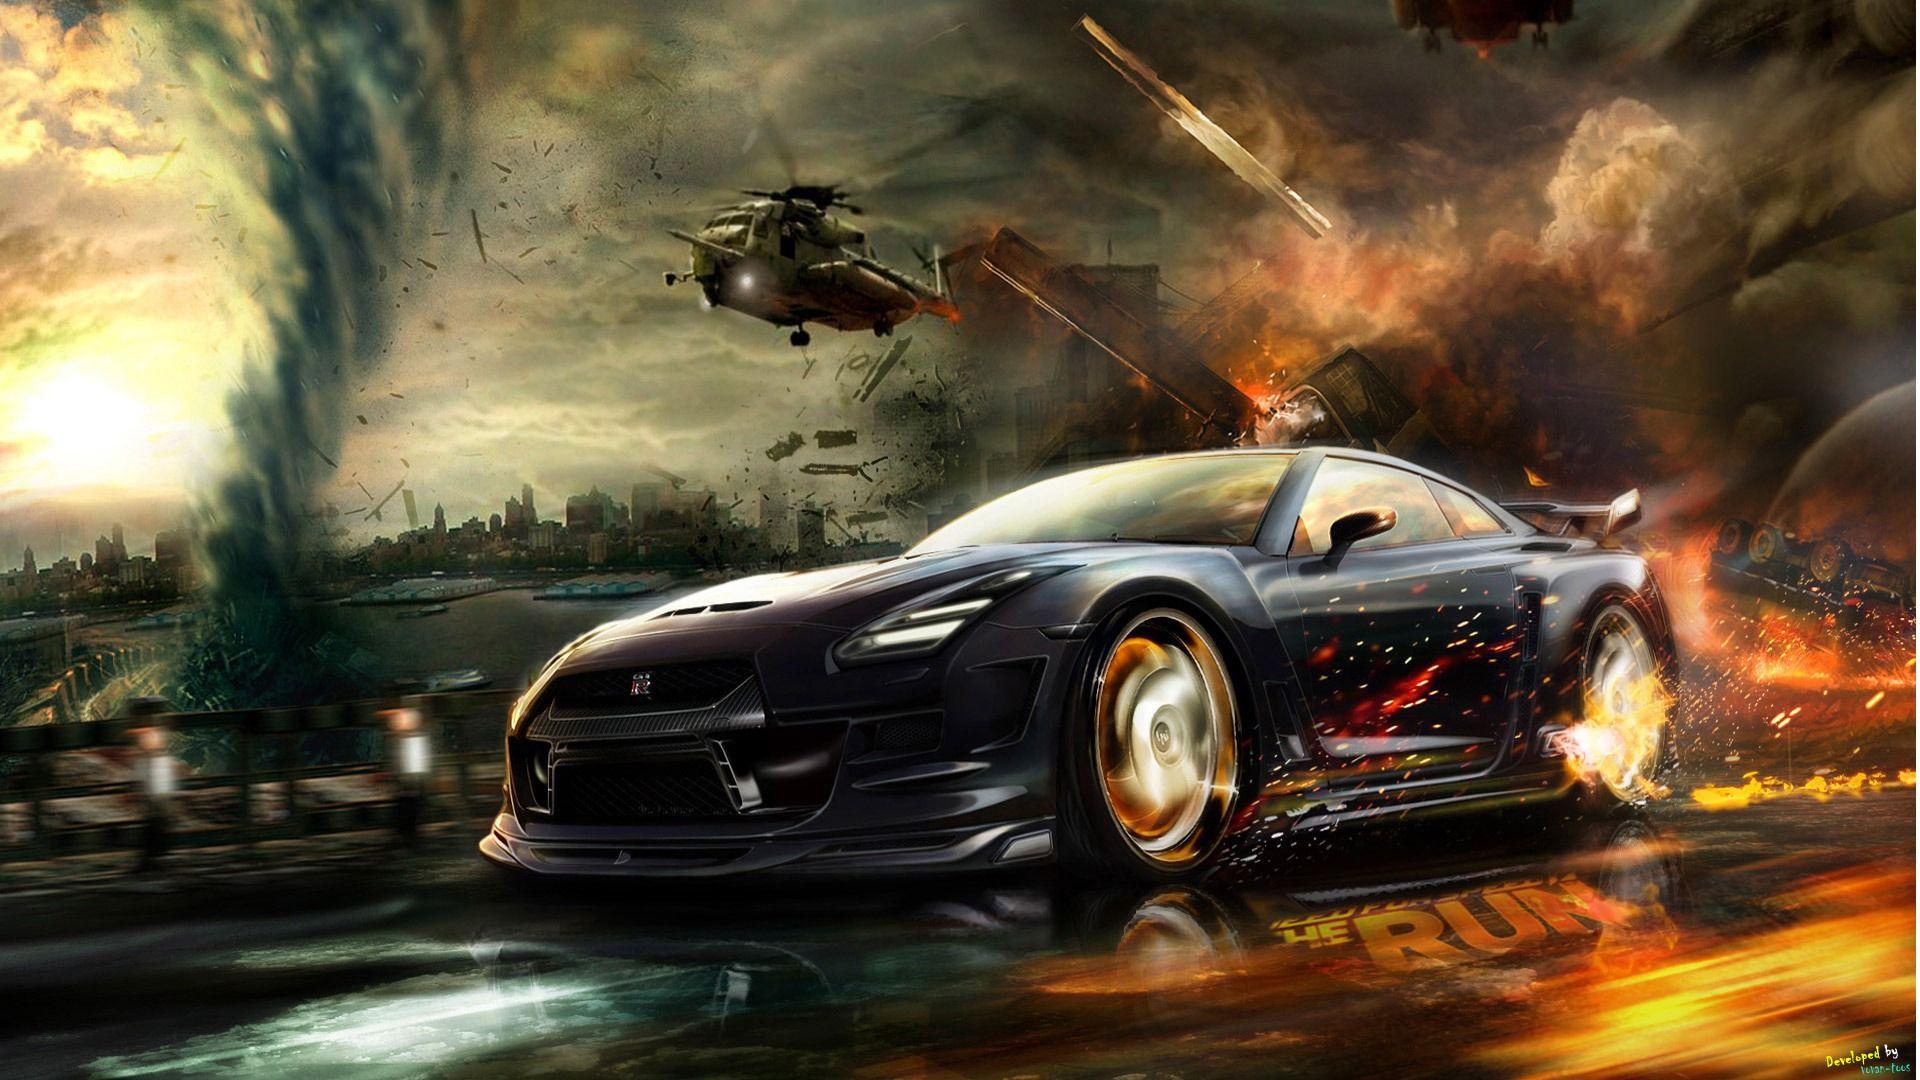 V.86: Need For Speed Wallpaper, HD Image of Need For Speed, Ultra